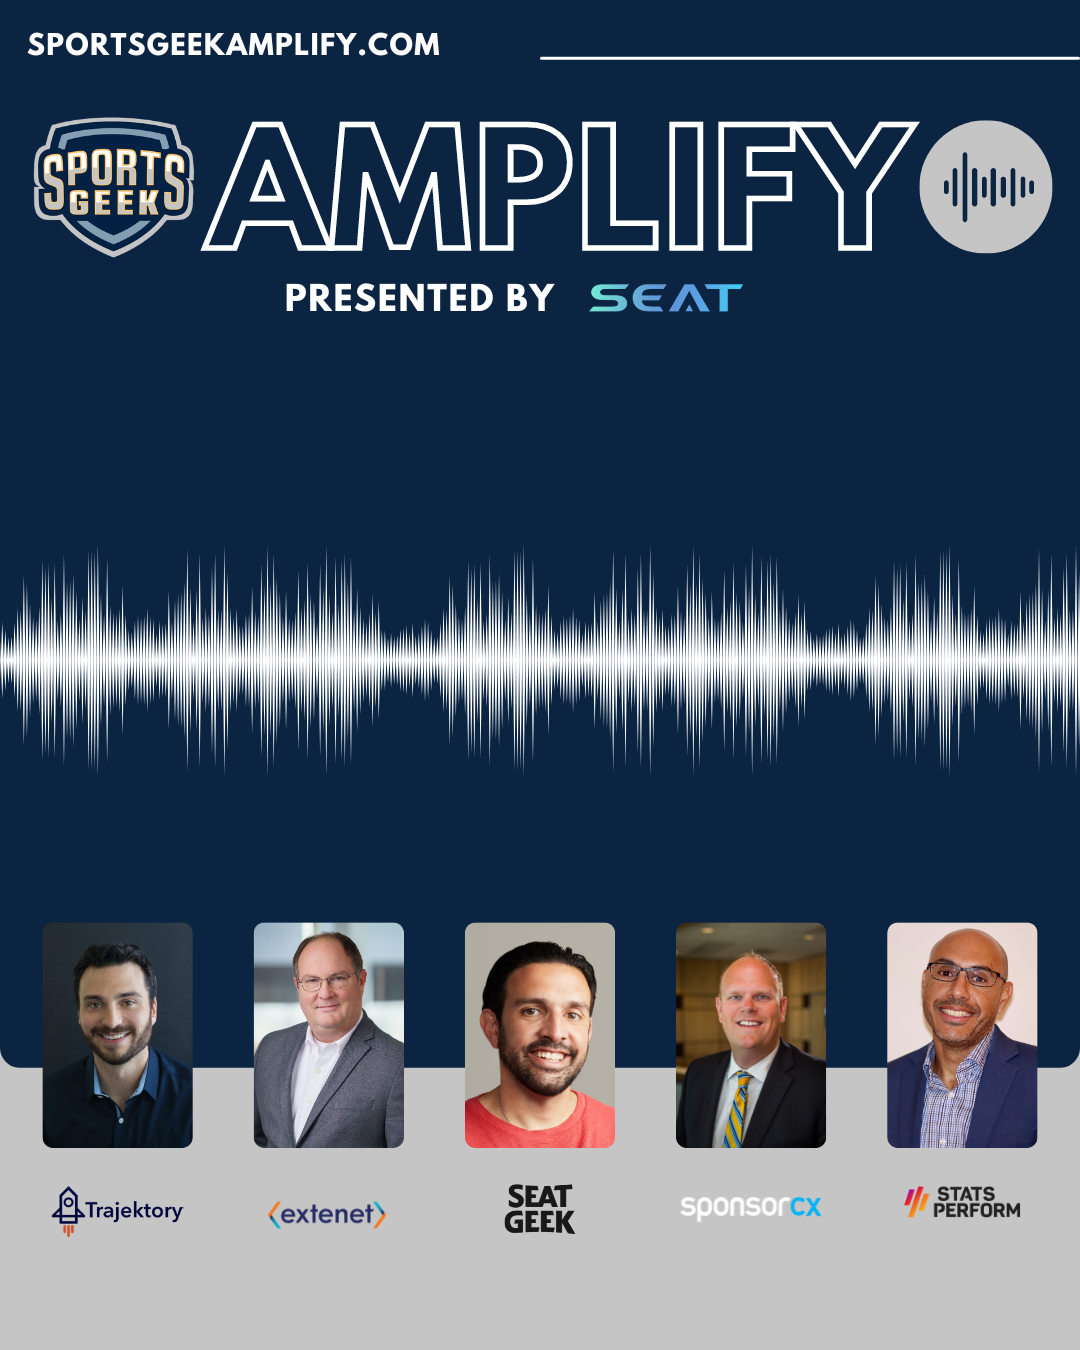 Sports Geek Amplify - presented by SEAT